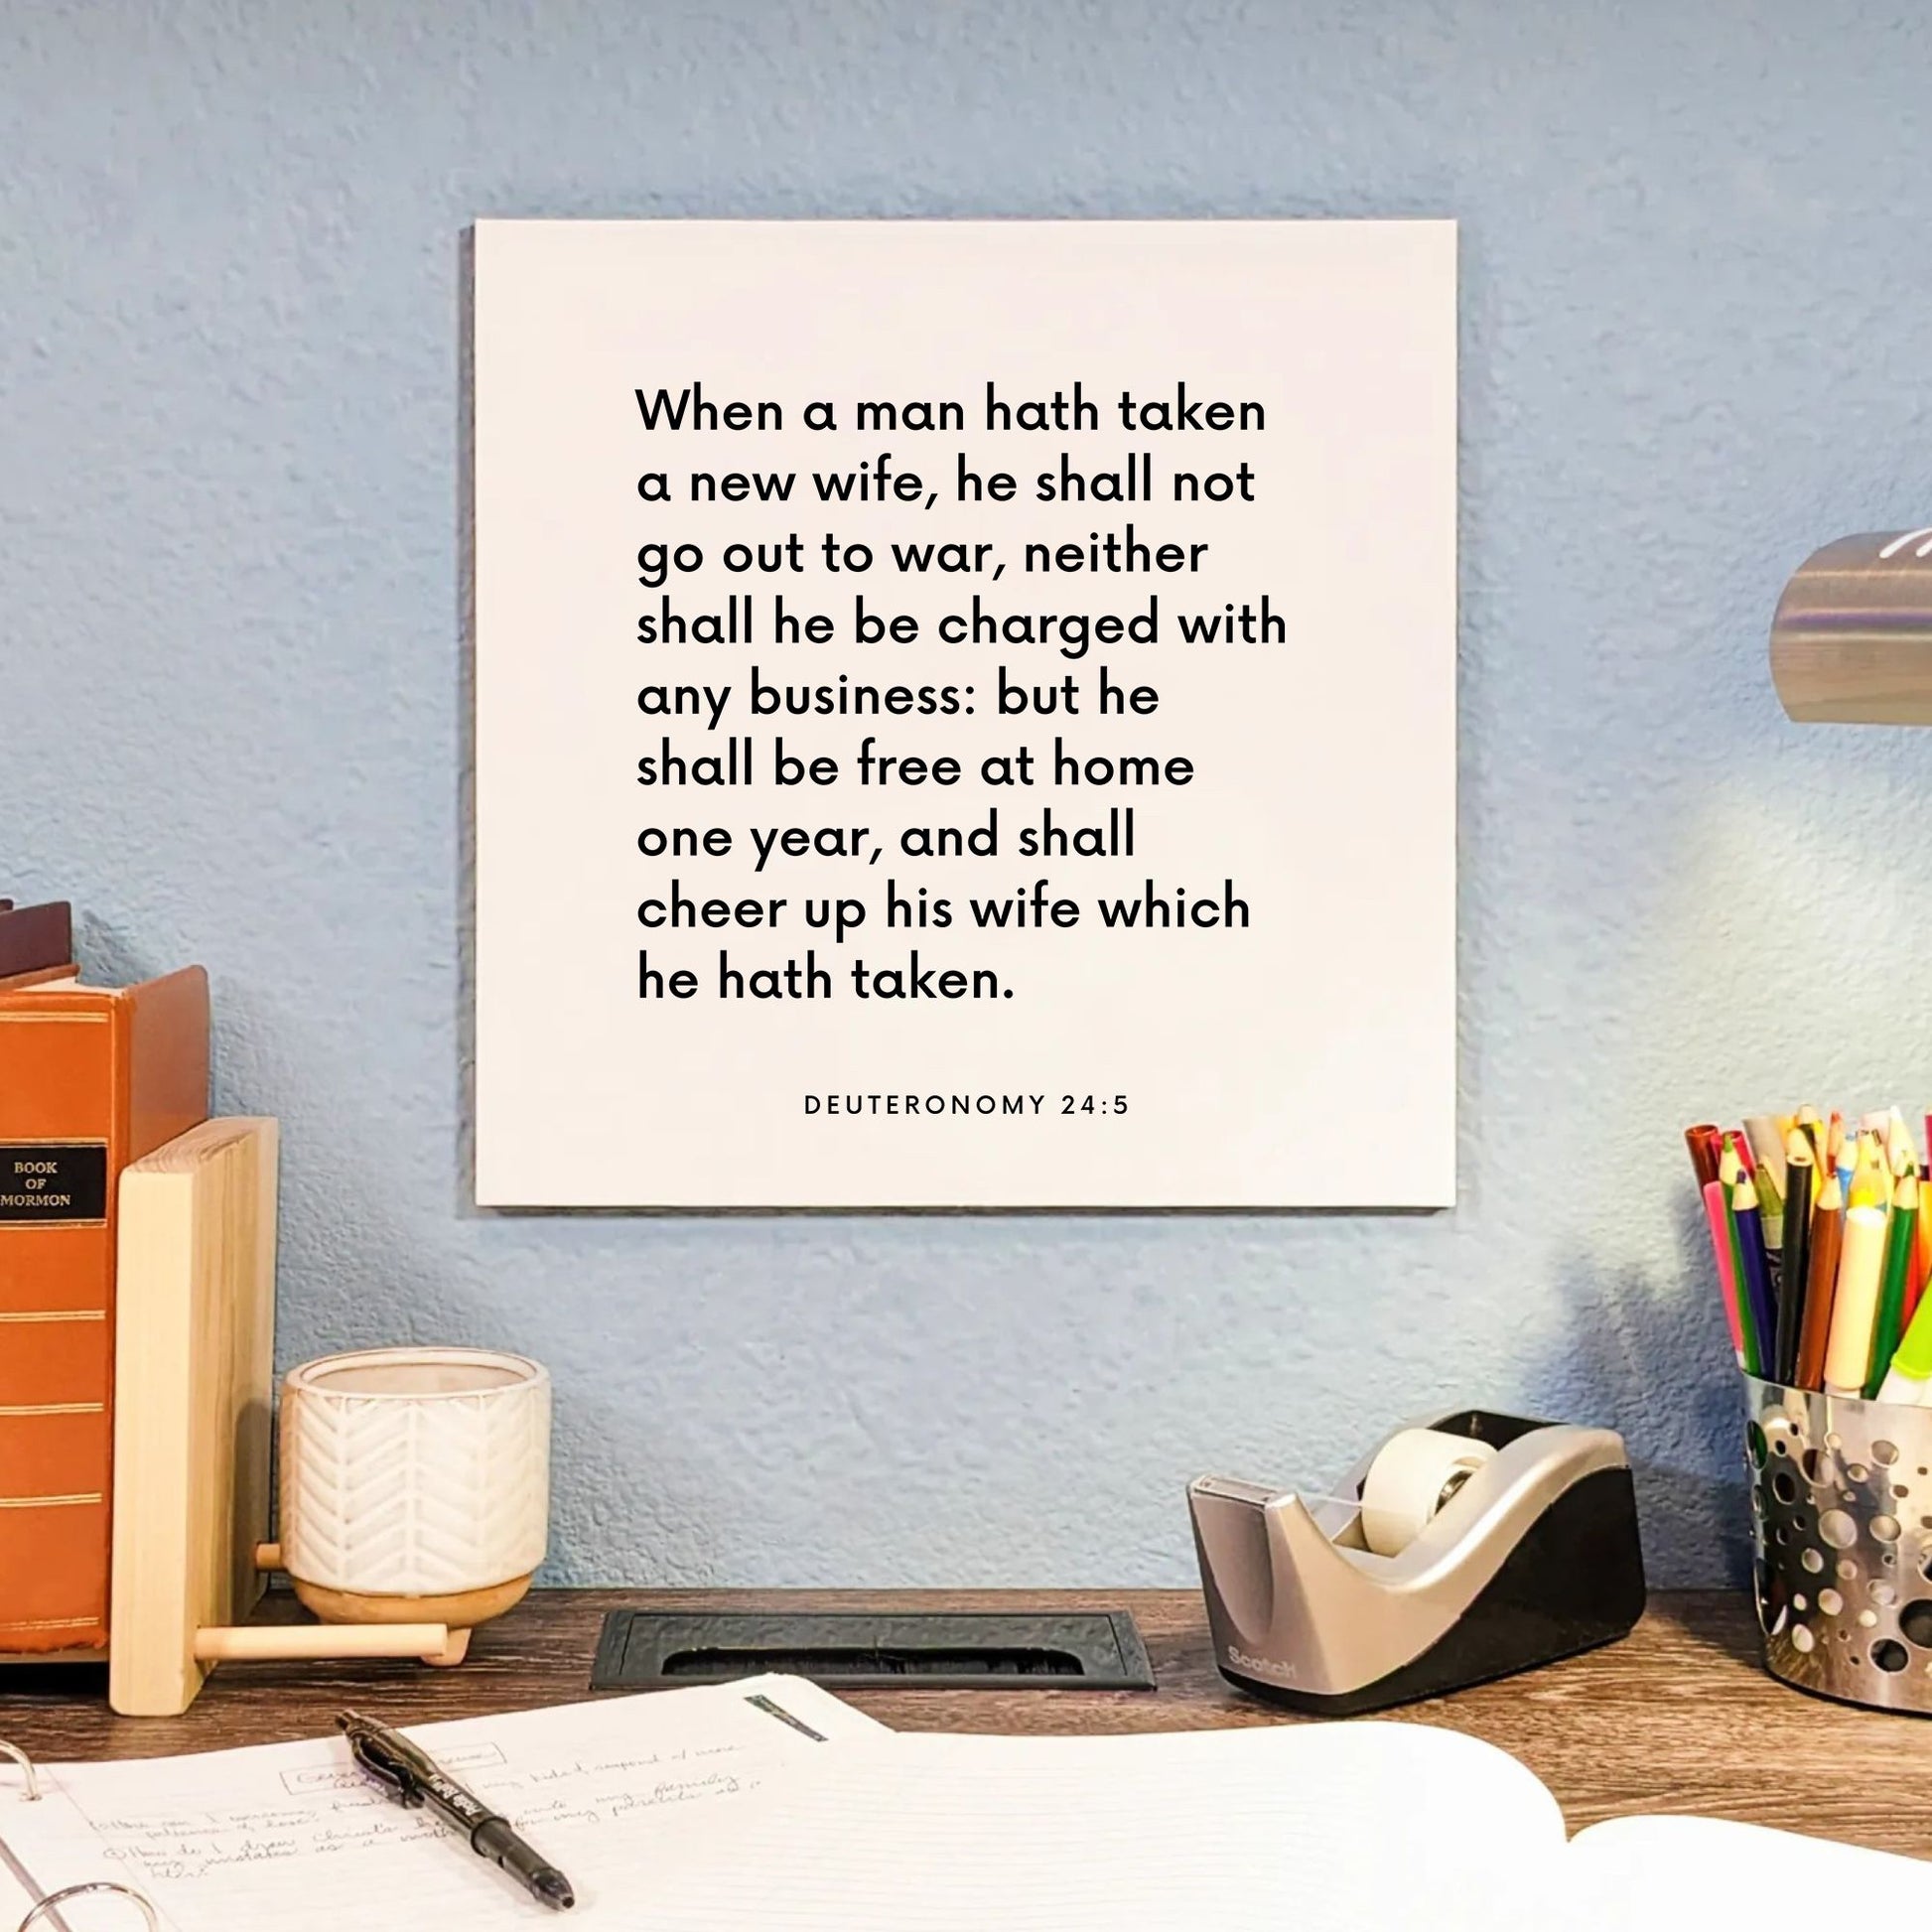 Desk mouting of the scripture tile for Deuteronomy 24:5 - "When a man hath taken a new wife, he shall not go out to war"